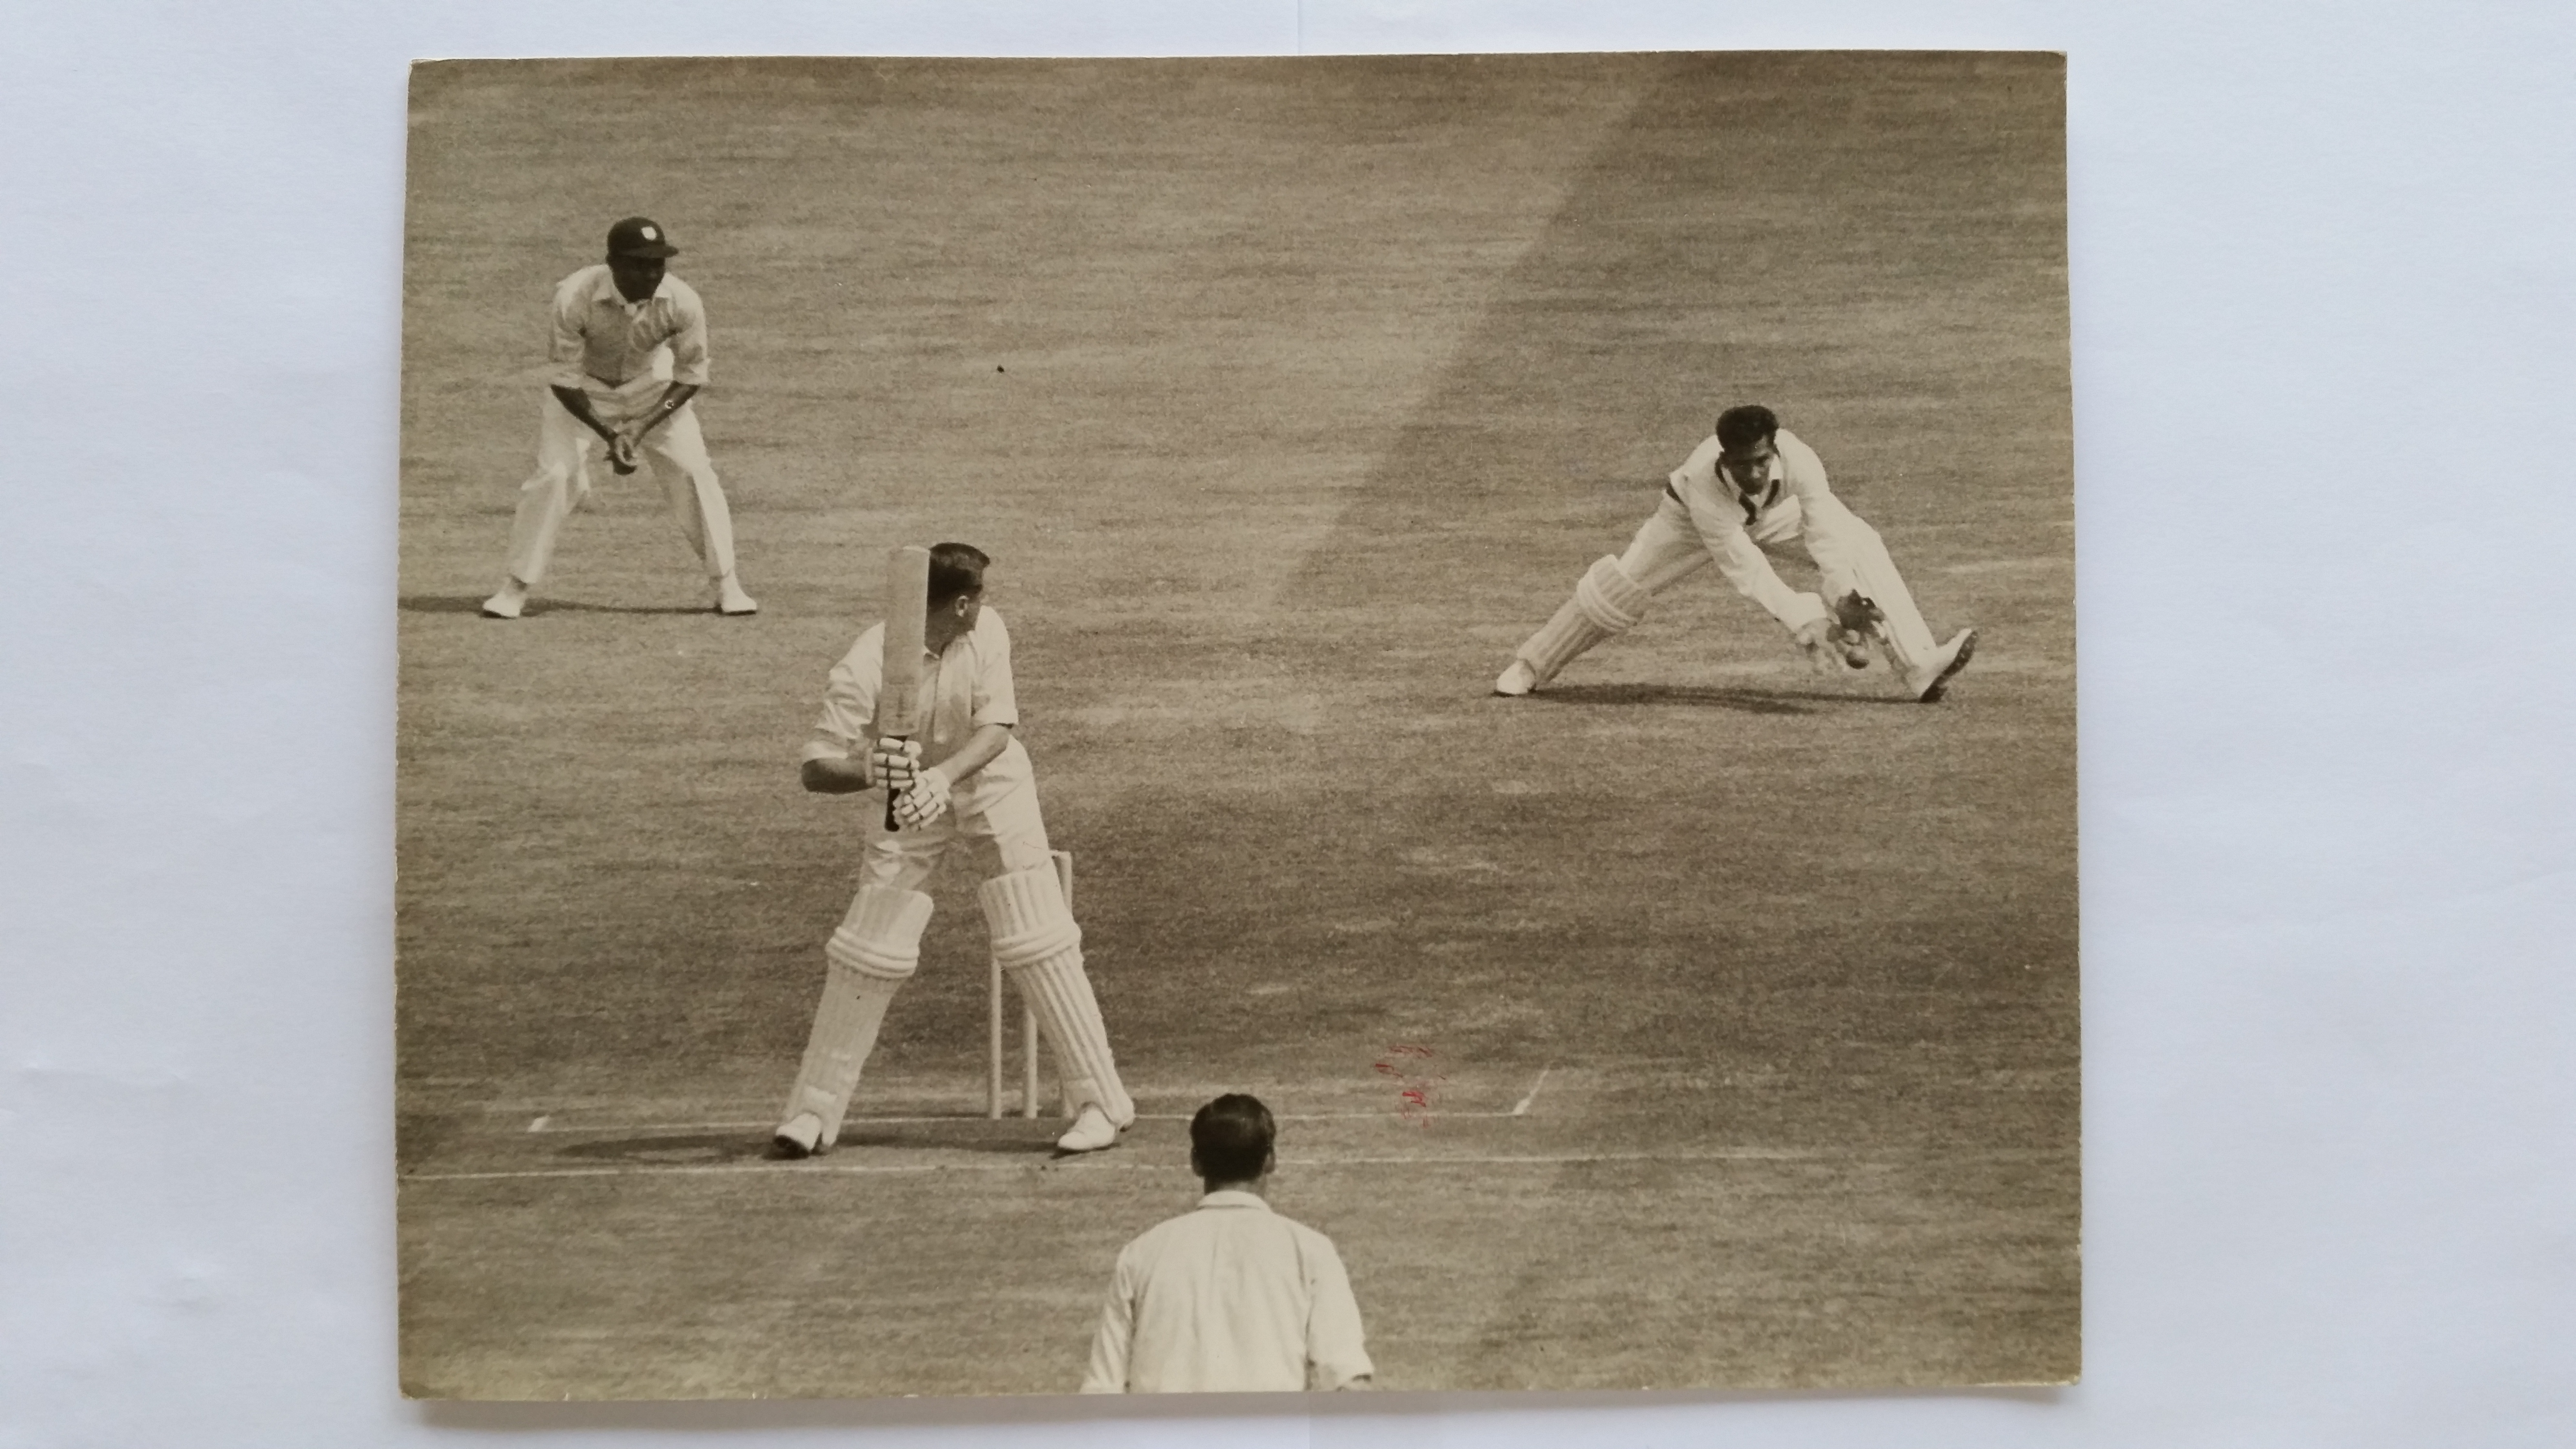 CRICKET, press photos, West Indies in England, 1957, showing May & Richardson batting, press stamp - Image 3 of 4